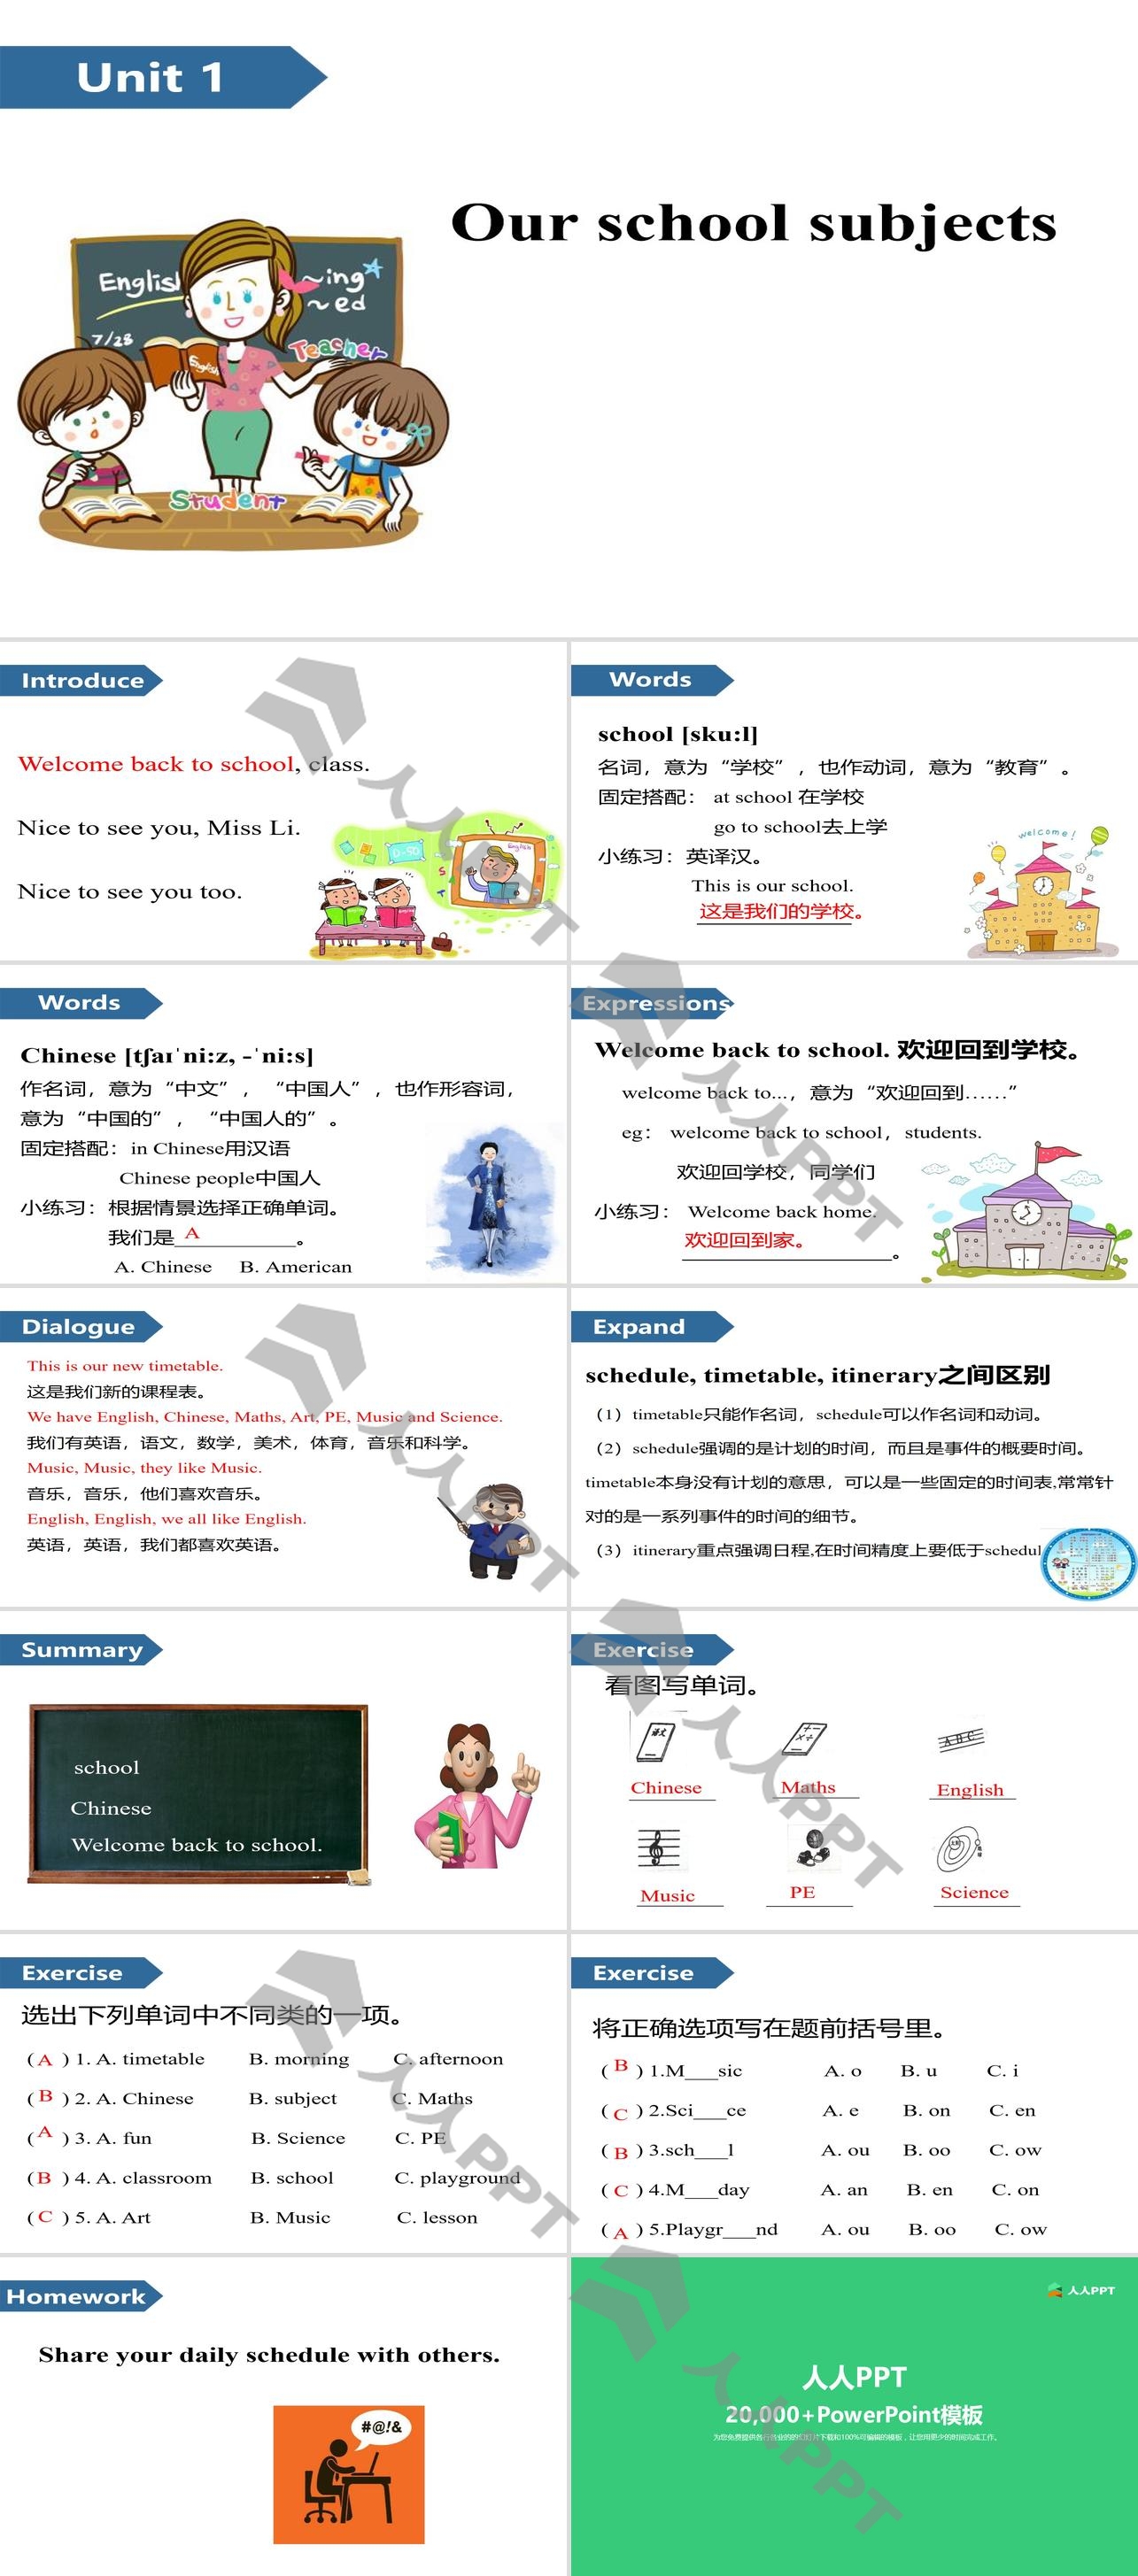 《Our school subjects》PPT(第一课时)长图